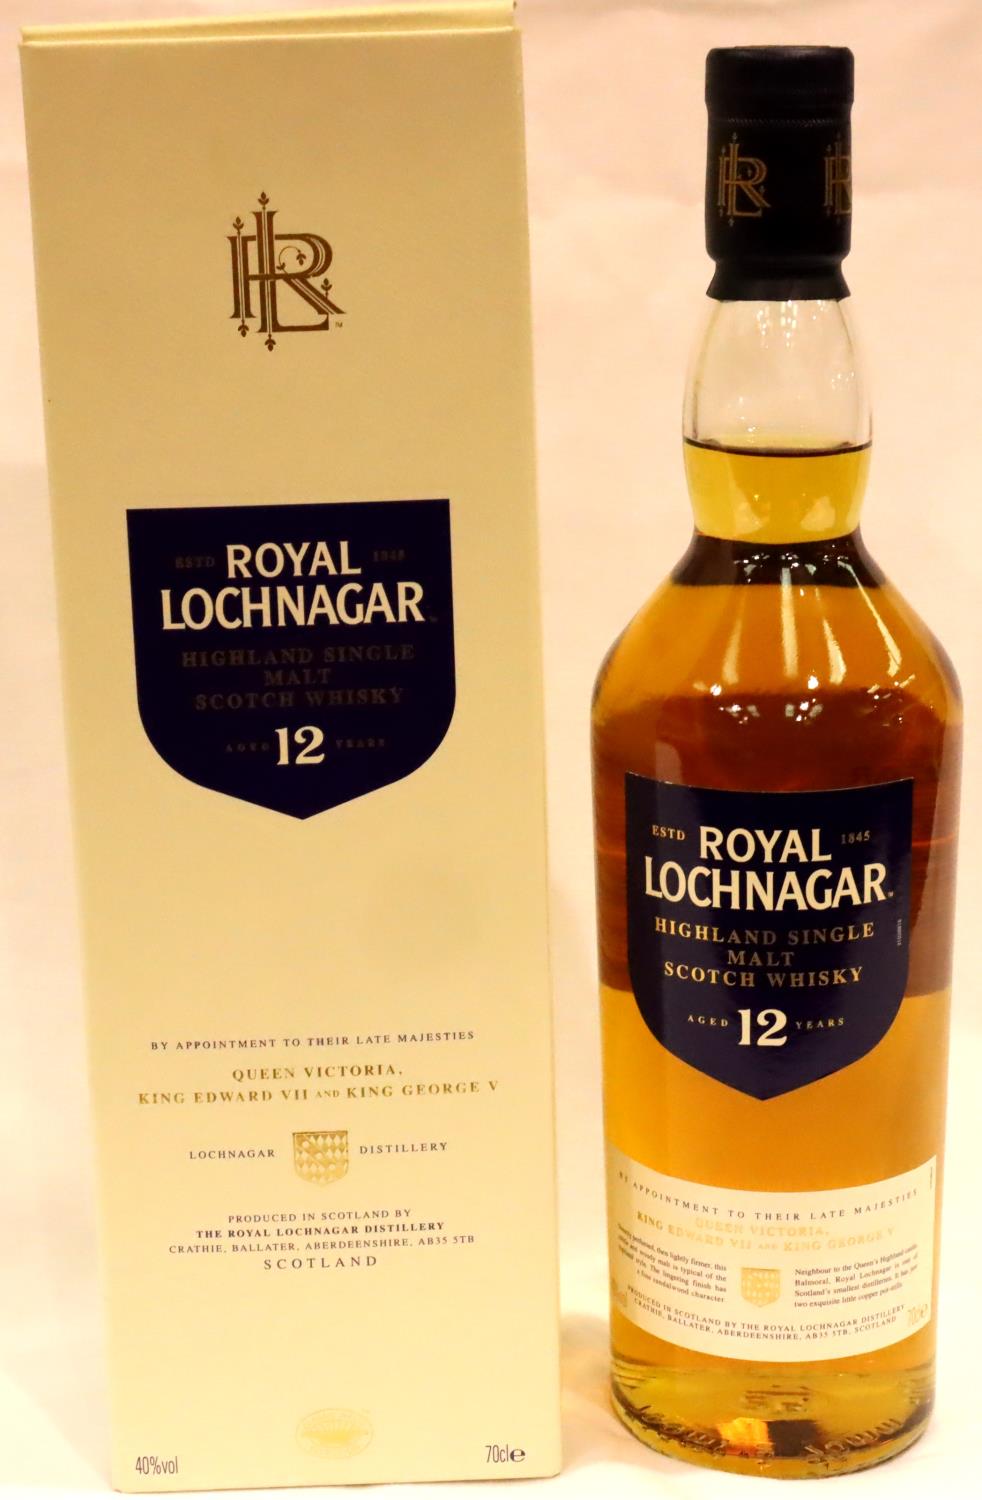 Bottle of Royal Lochnagar 12 years old whisky. P&P Group 2 (£18+VAT for the first lot and £3+VAT for